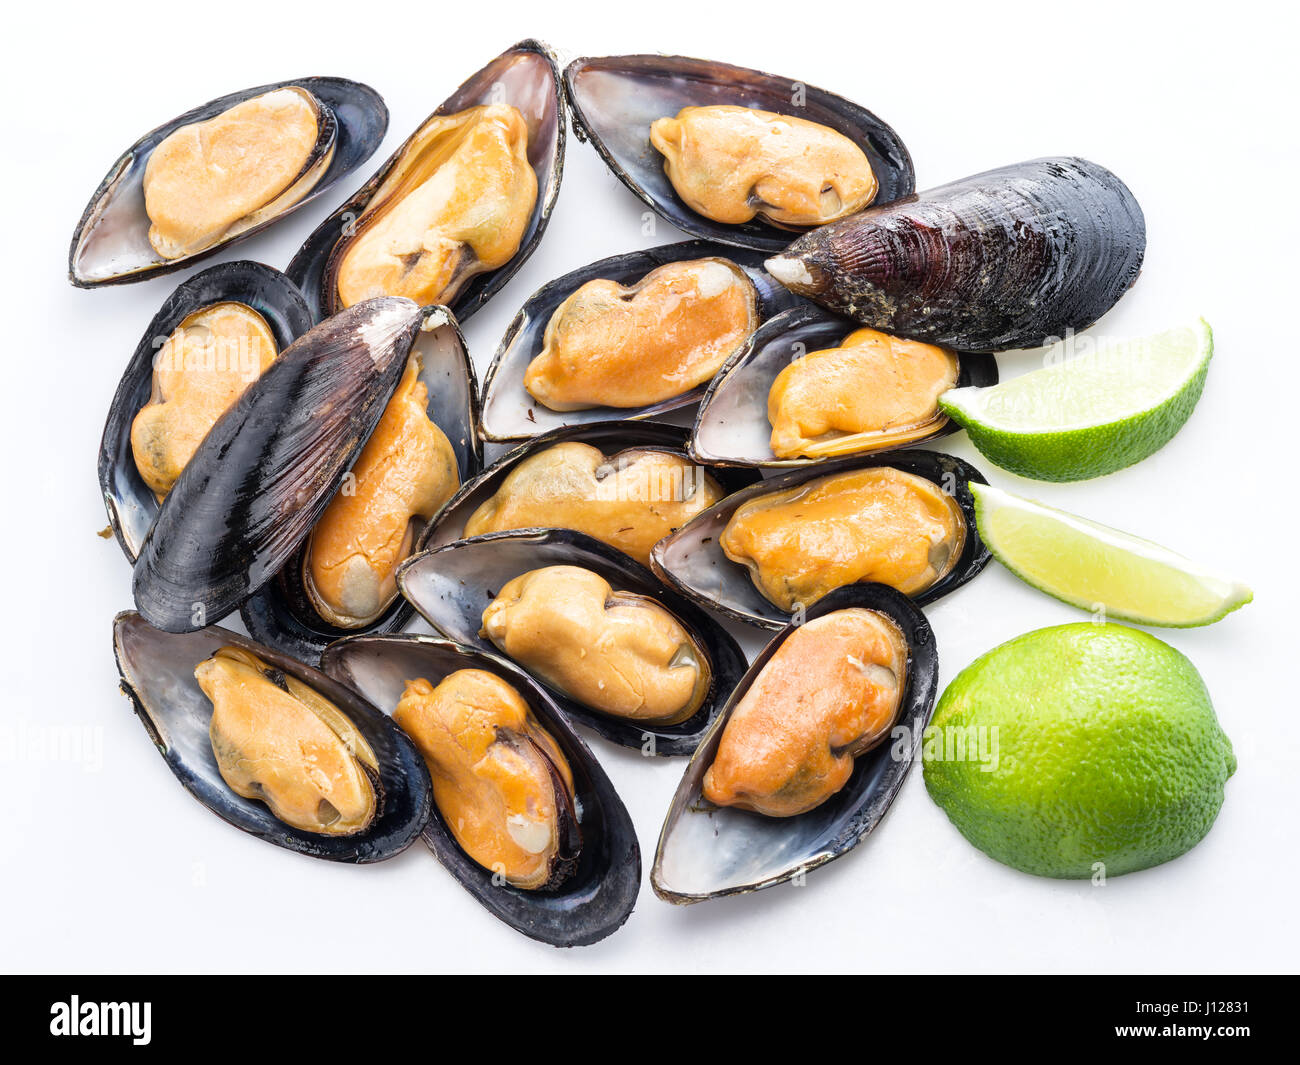 Boiled mussels on a white background. Stock Photo